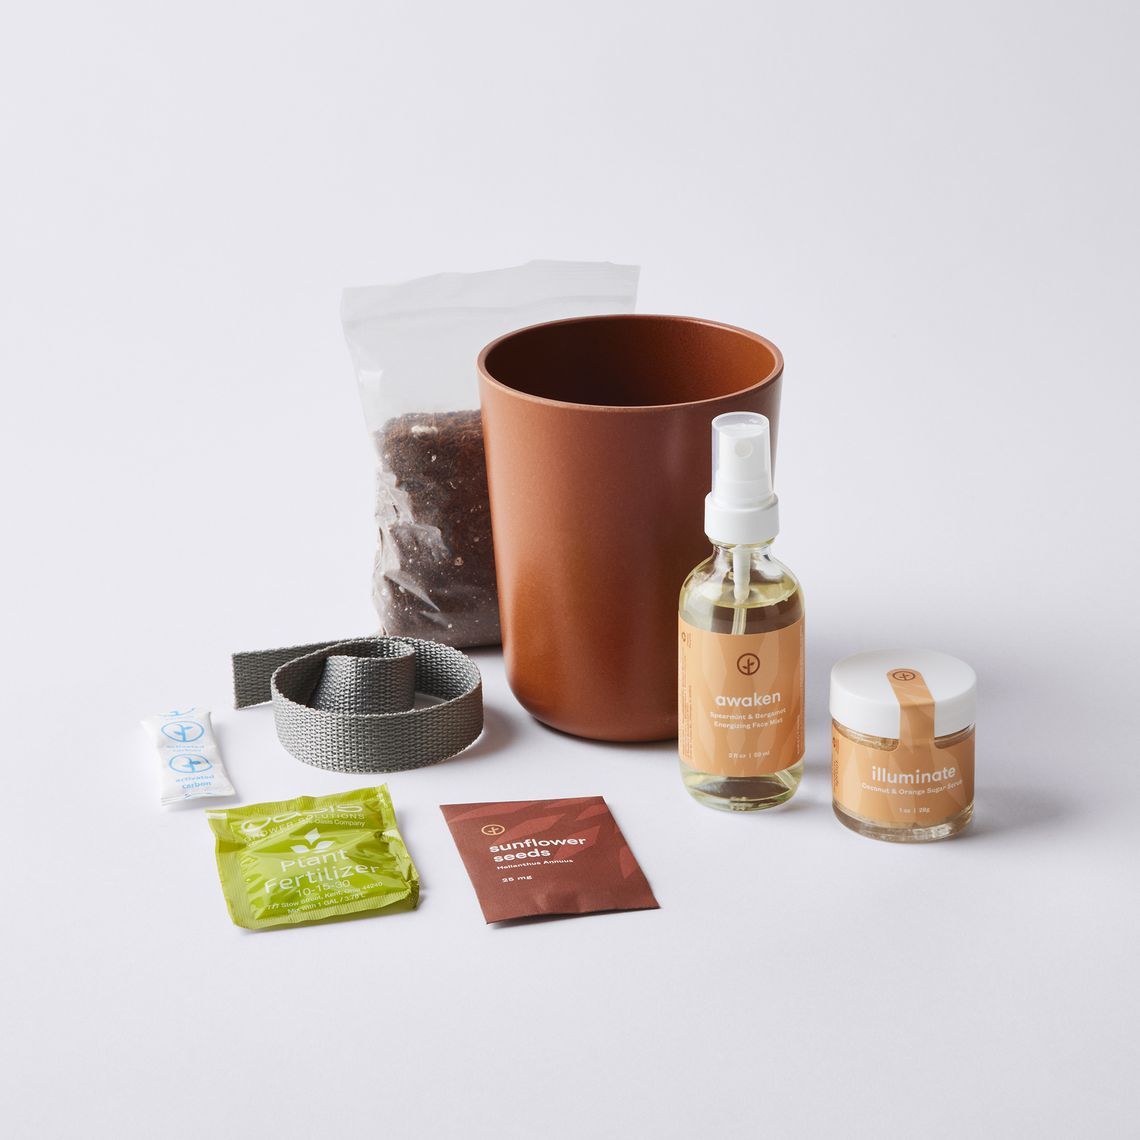 Modern Sprout Take Care Gift Sets, 3 Options with Grow Kit on Food52